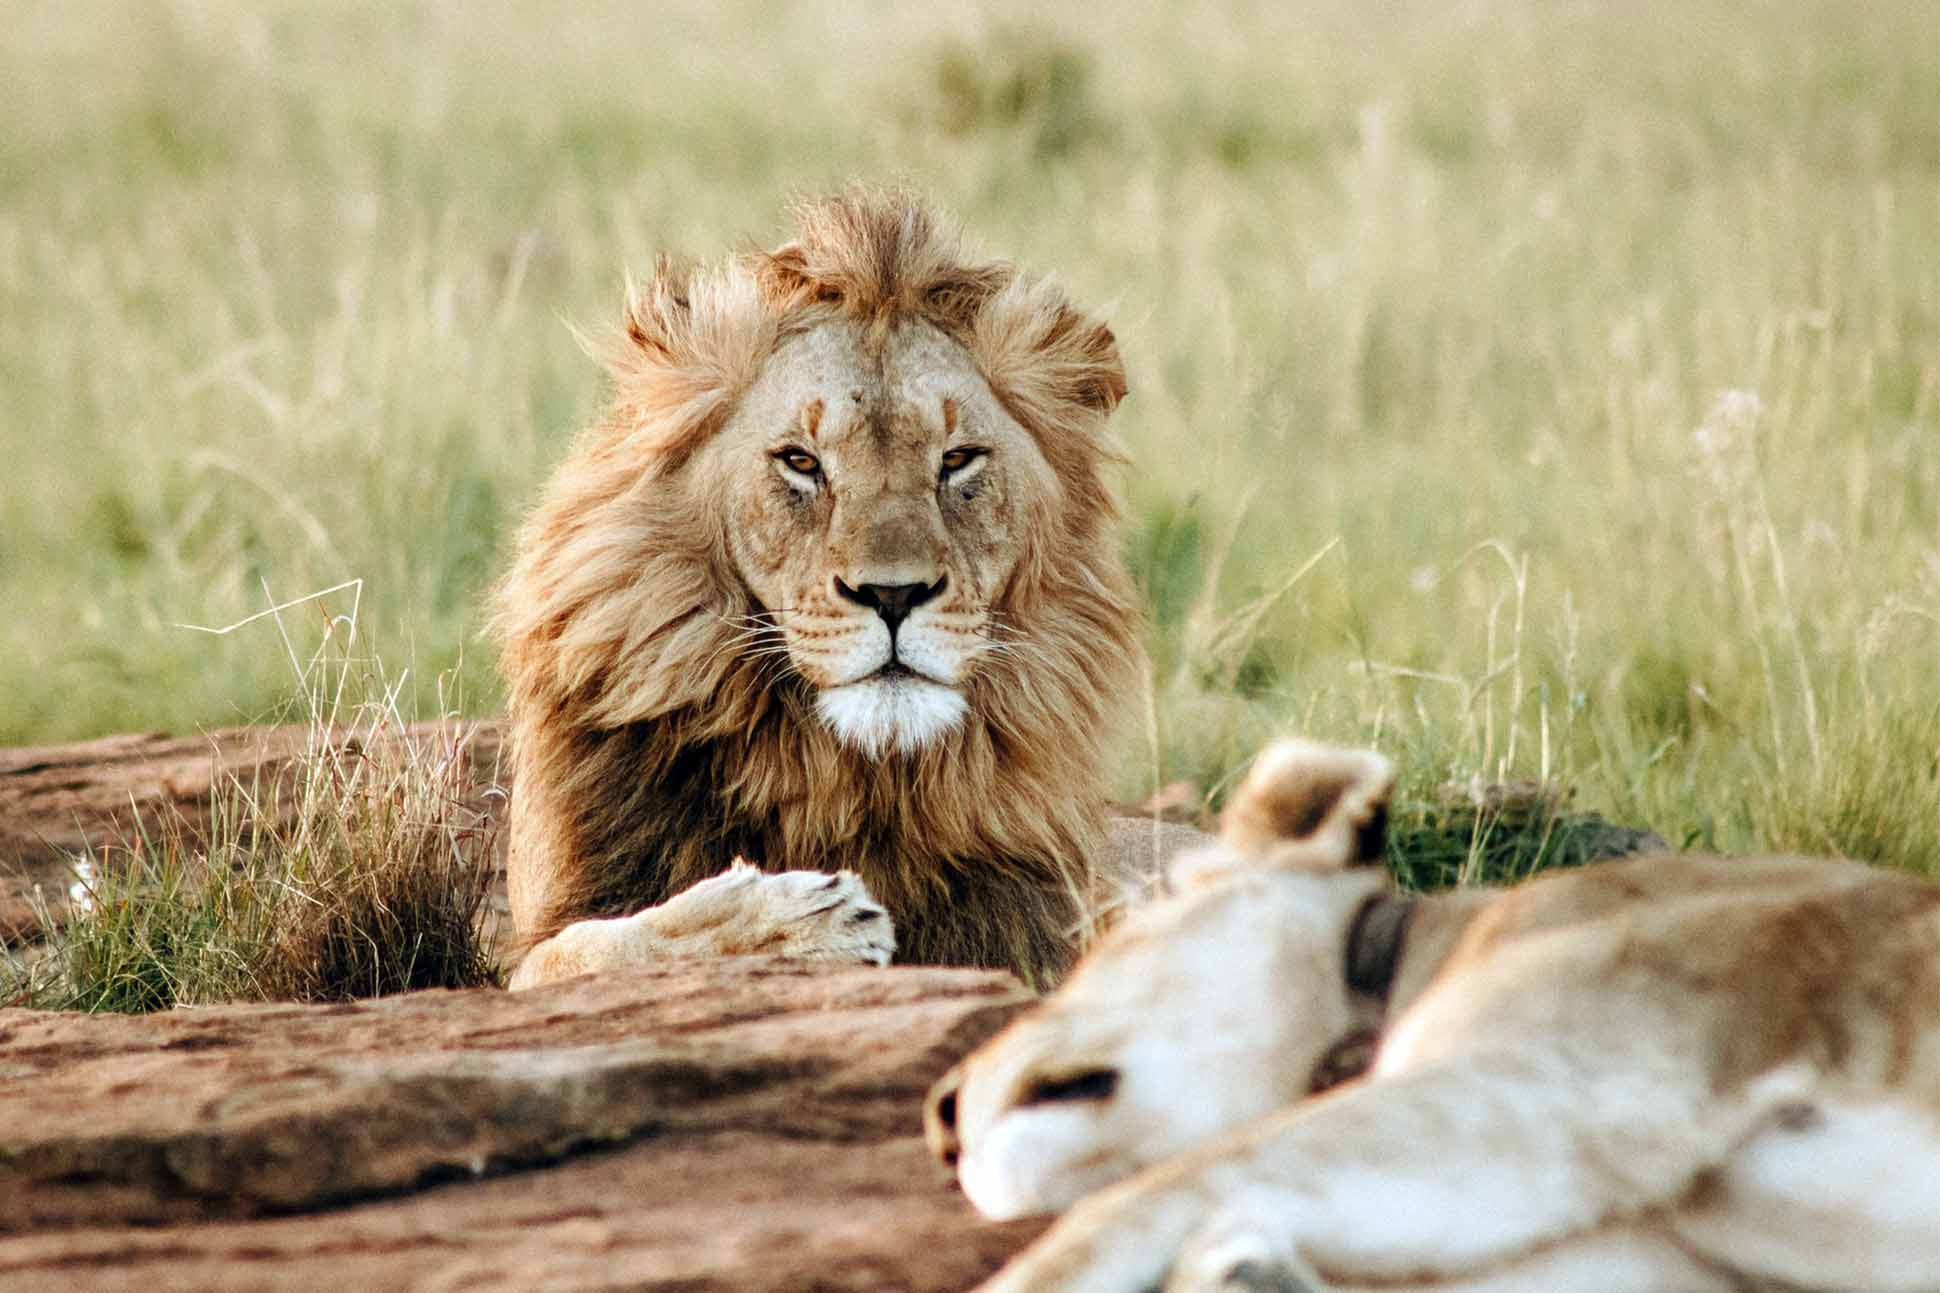 Lions in Kenya, a stop during the Abercrombie and Kent Private Jet Wildlife Safari